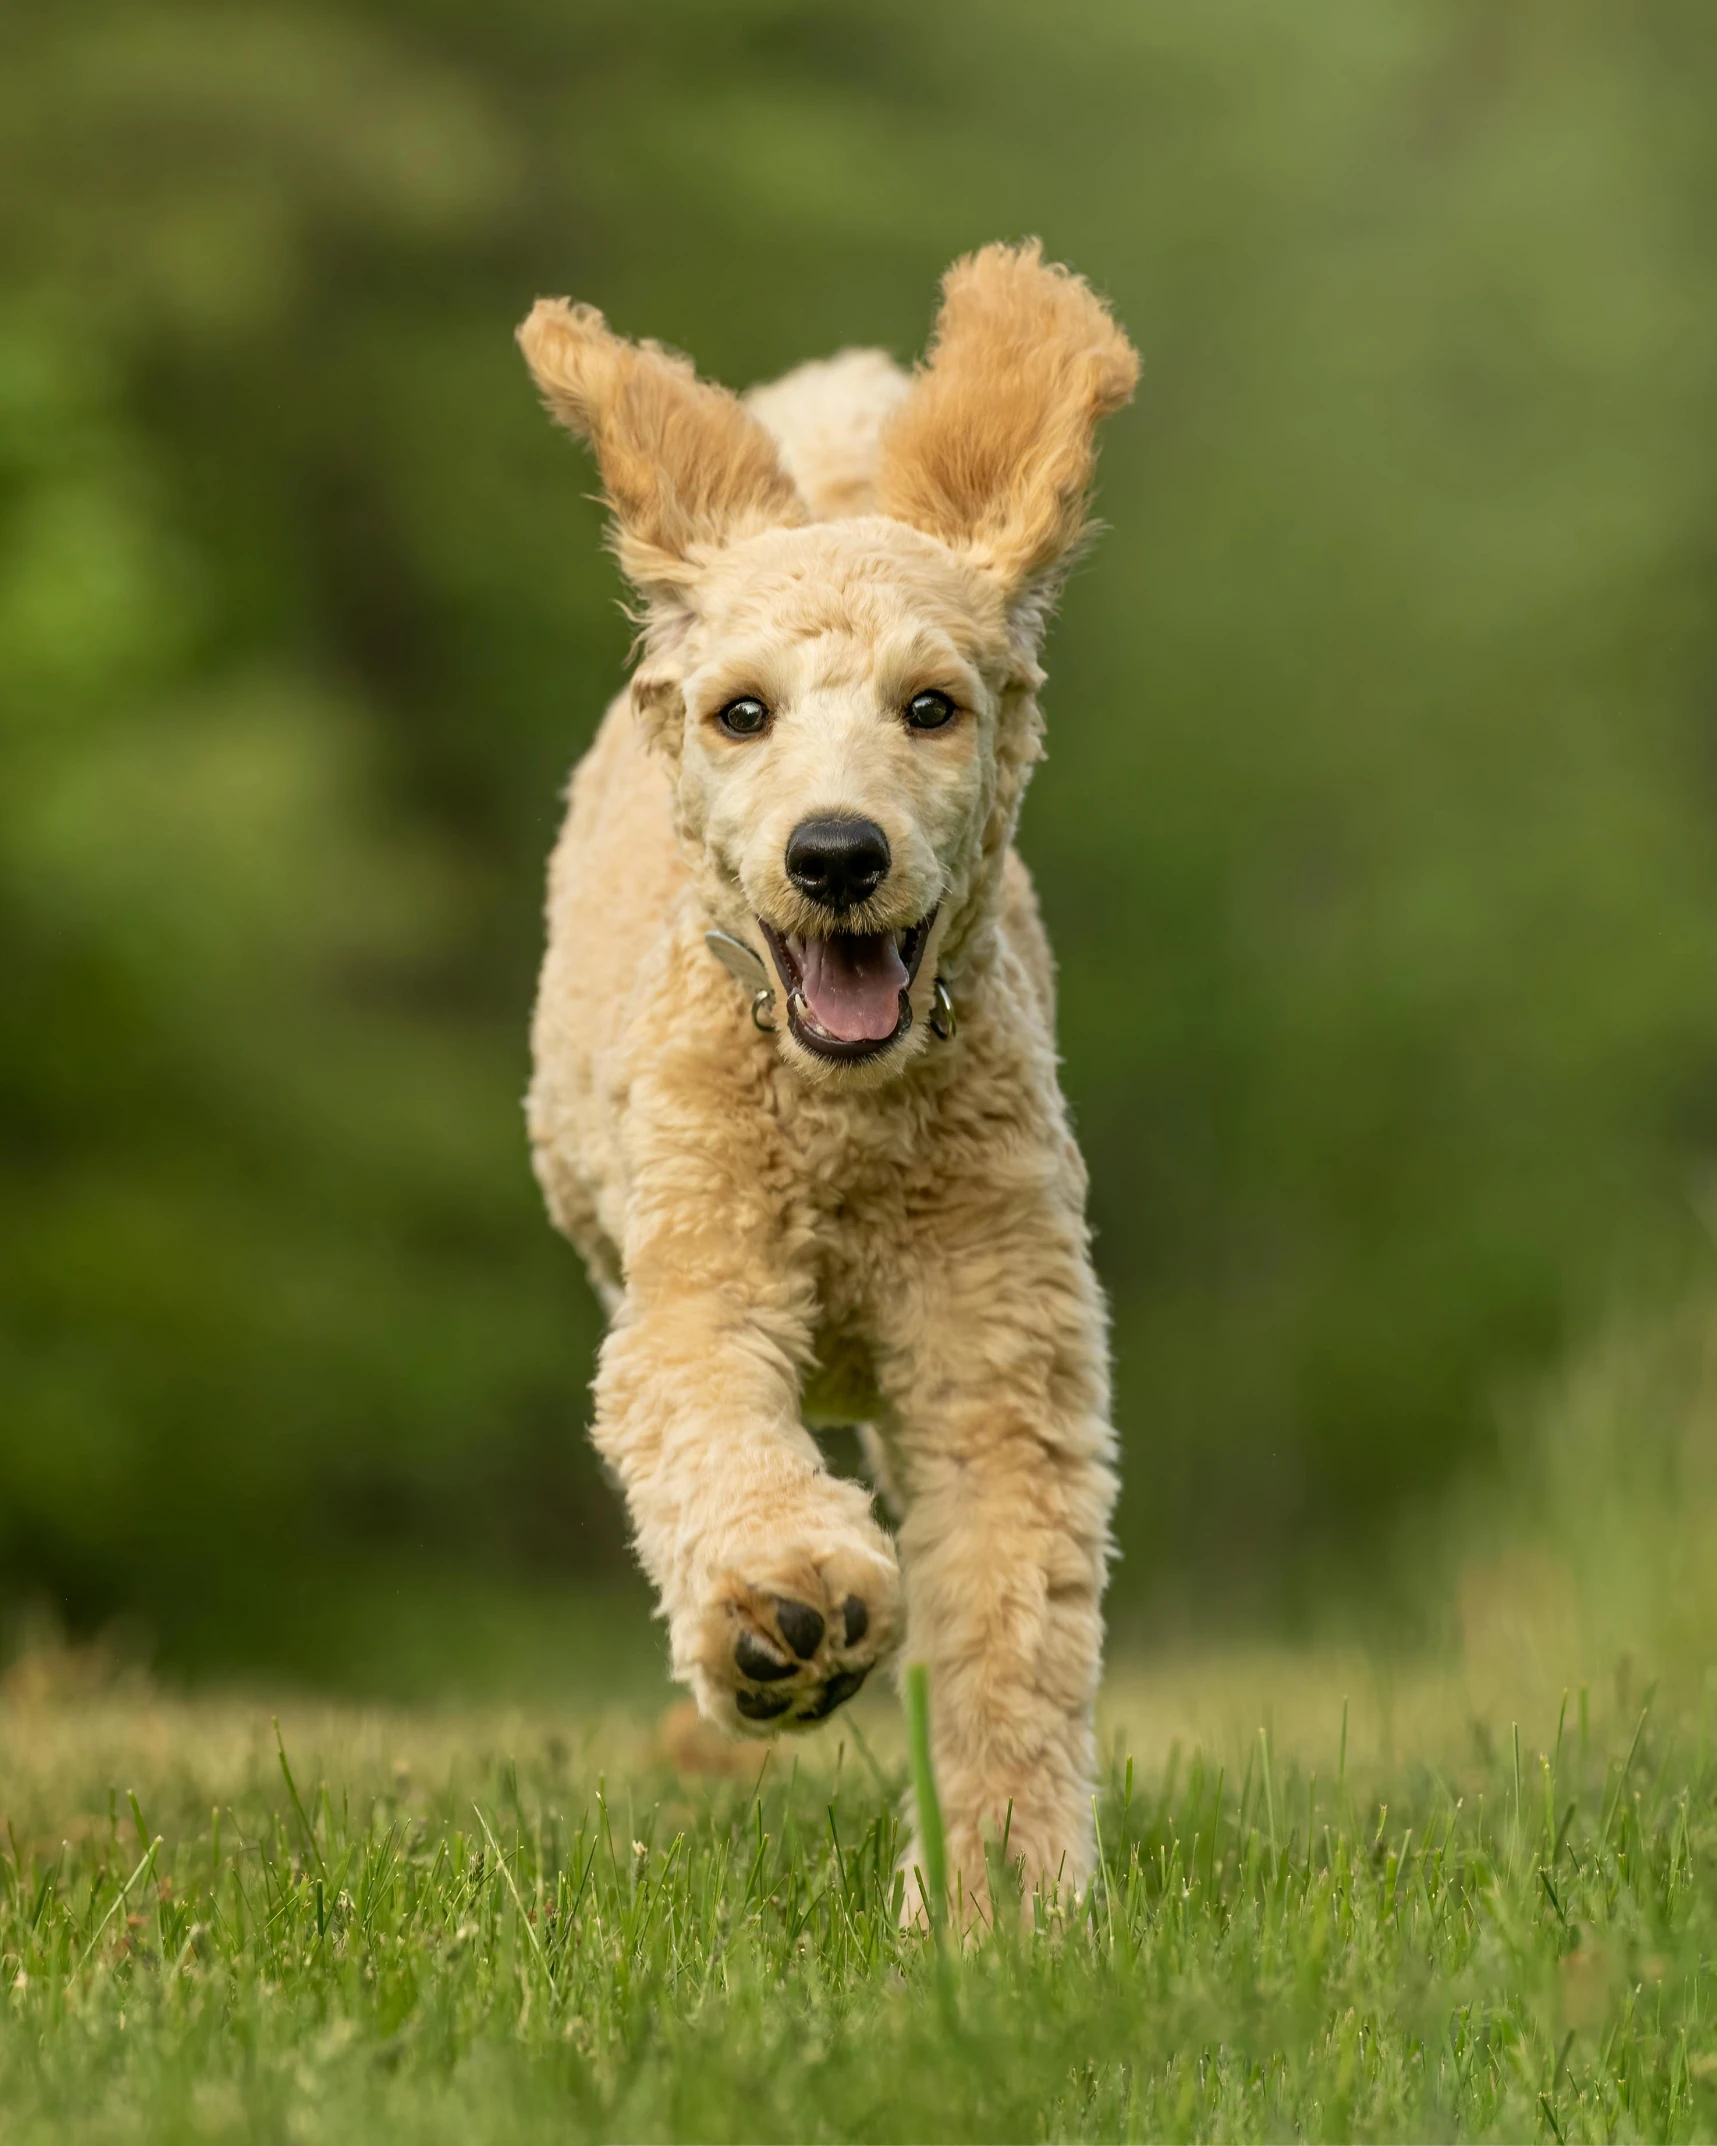 a dog running across a lush green field, blonde curly hair, lgbtq, large ears, instagram post